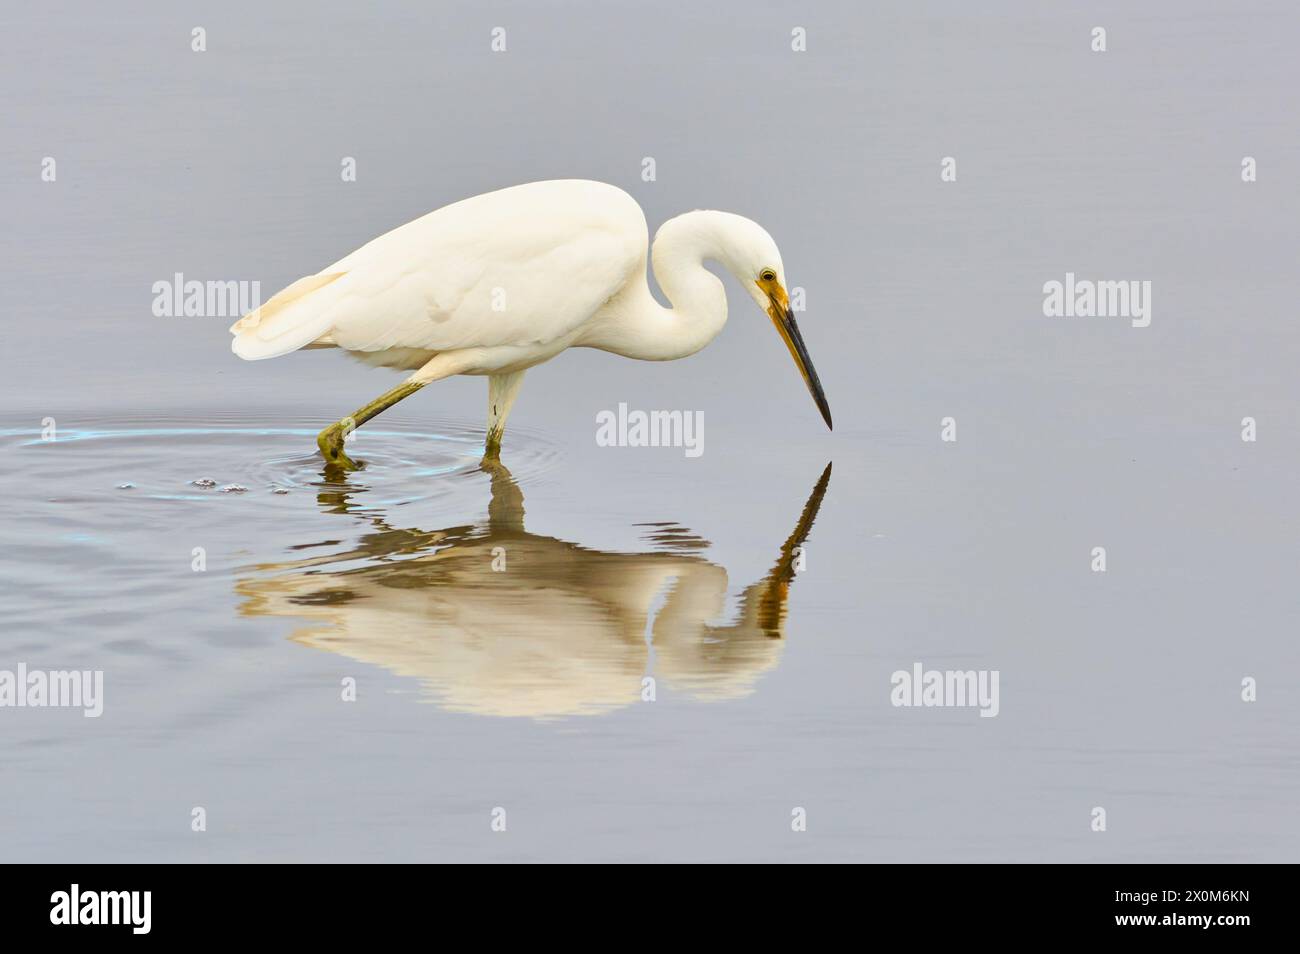 An Eastern Great Egret, Ardea alba modesta, stalking and hunting food in shallow water at Bibra Lake, Perth, Western Australia. Stock Photo